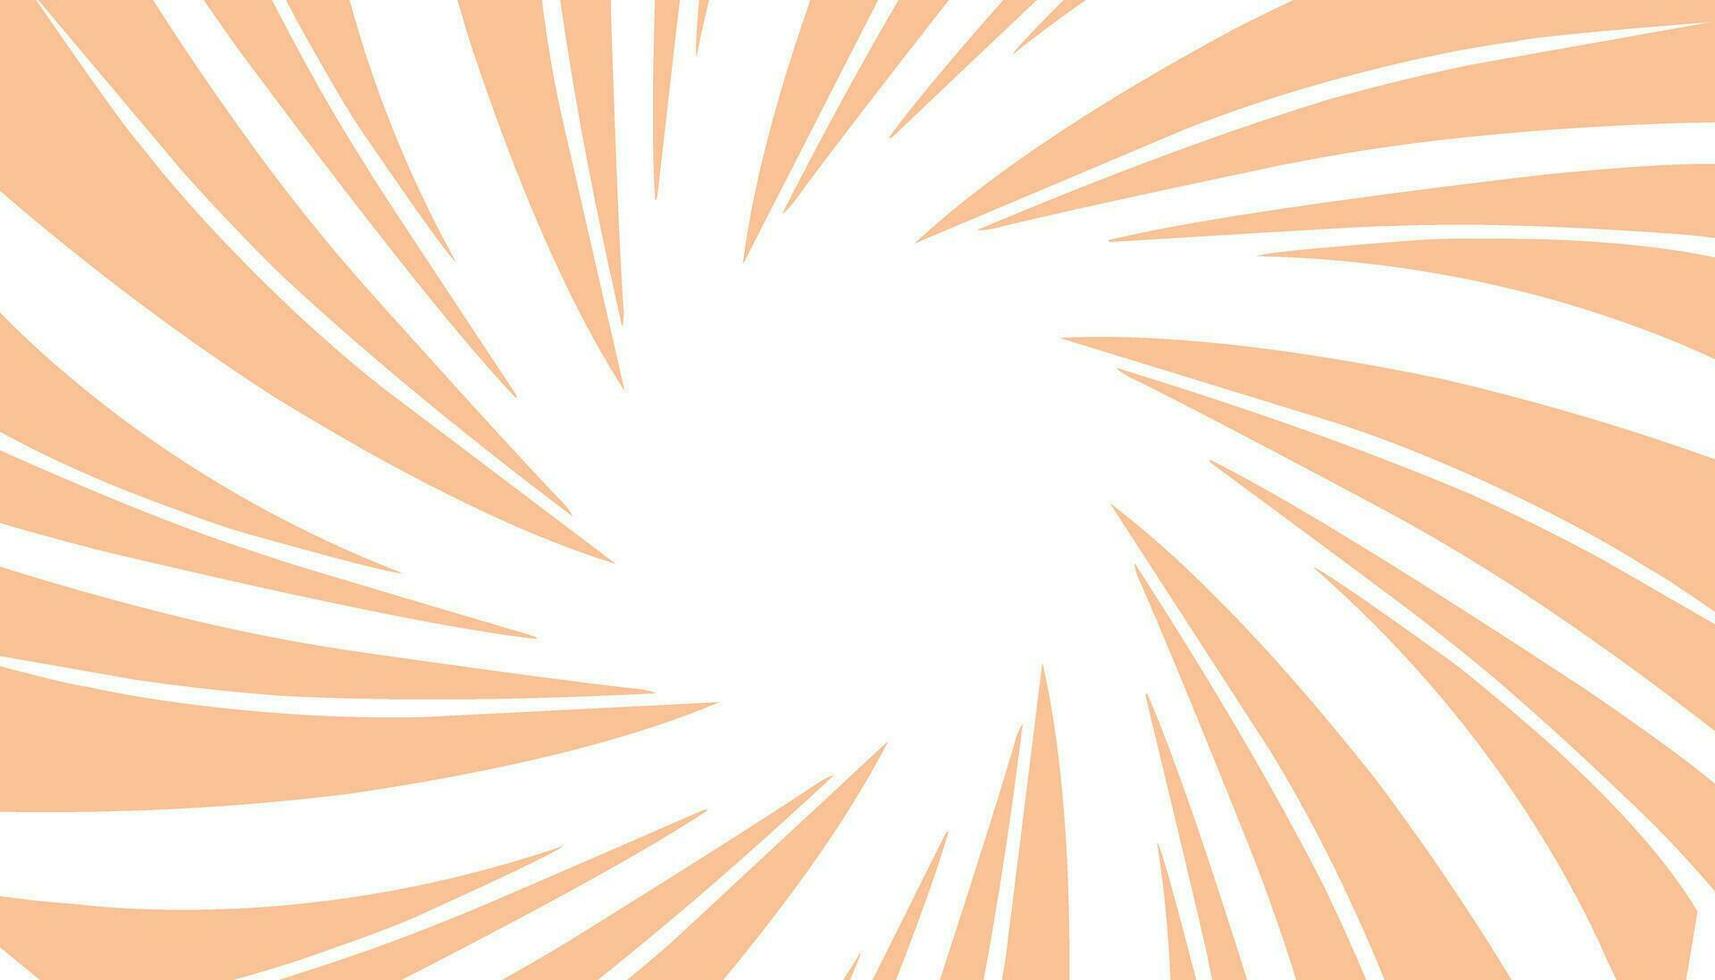 a white and orange swirl background with a spiral vector